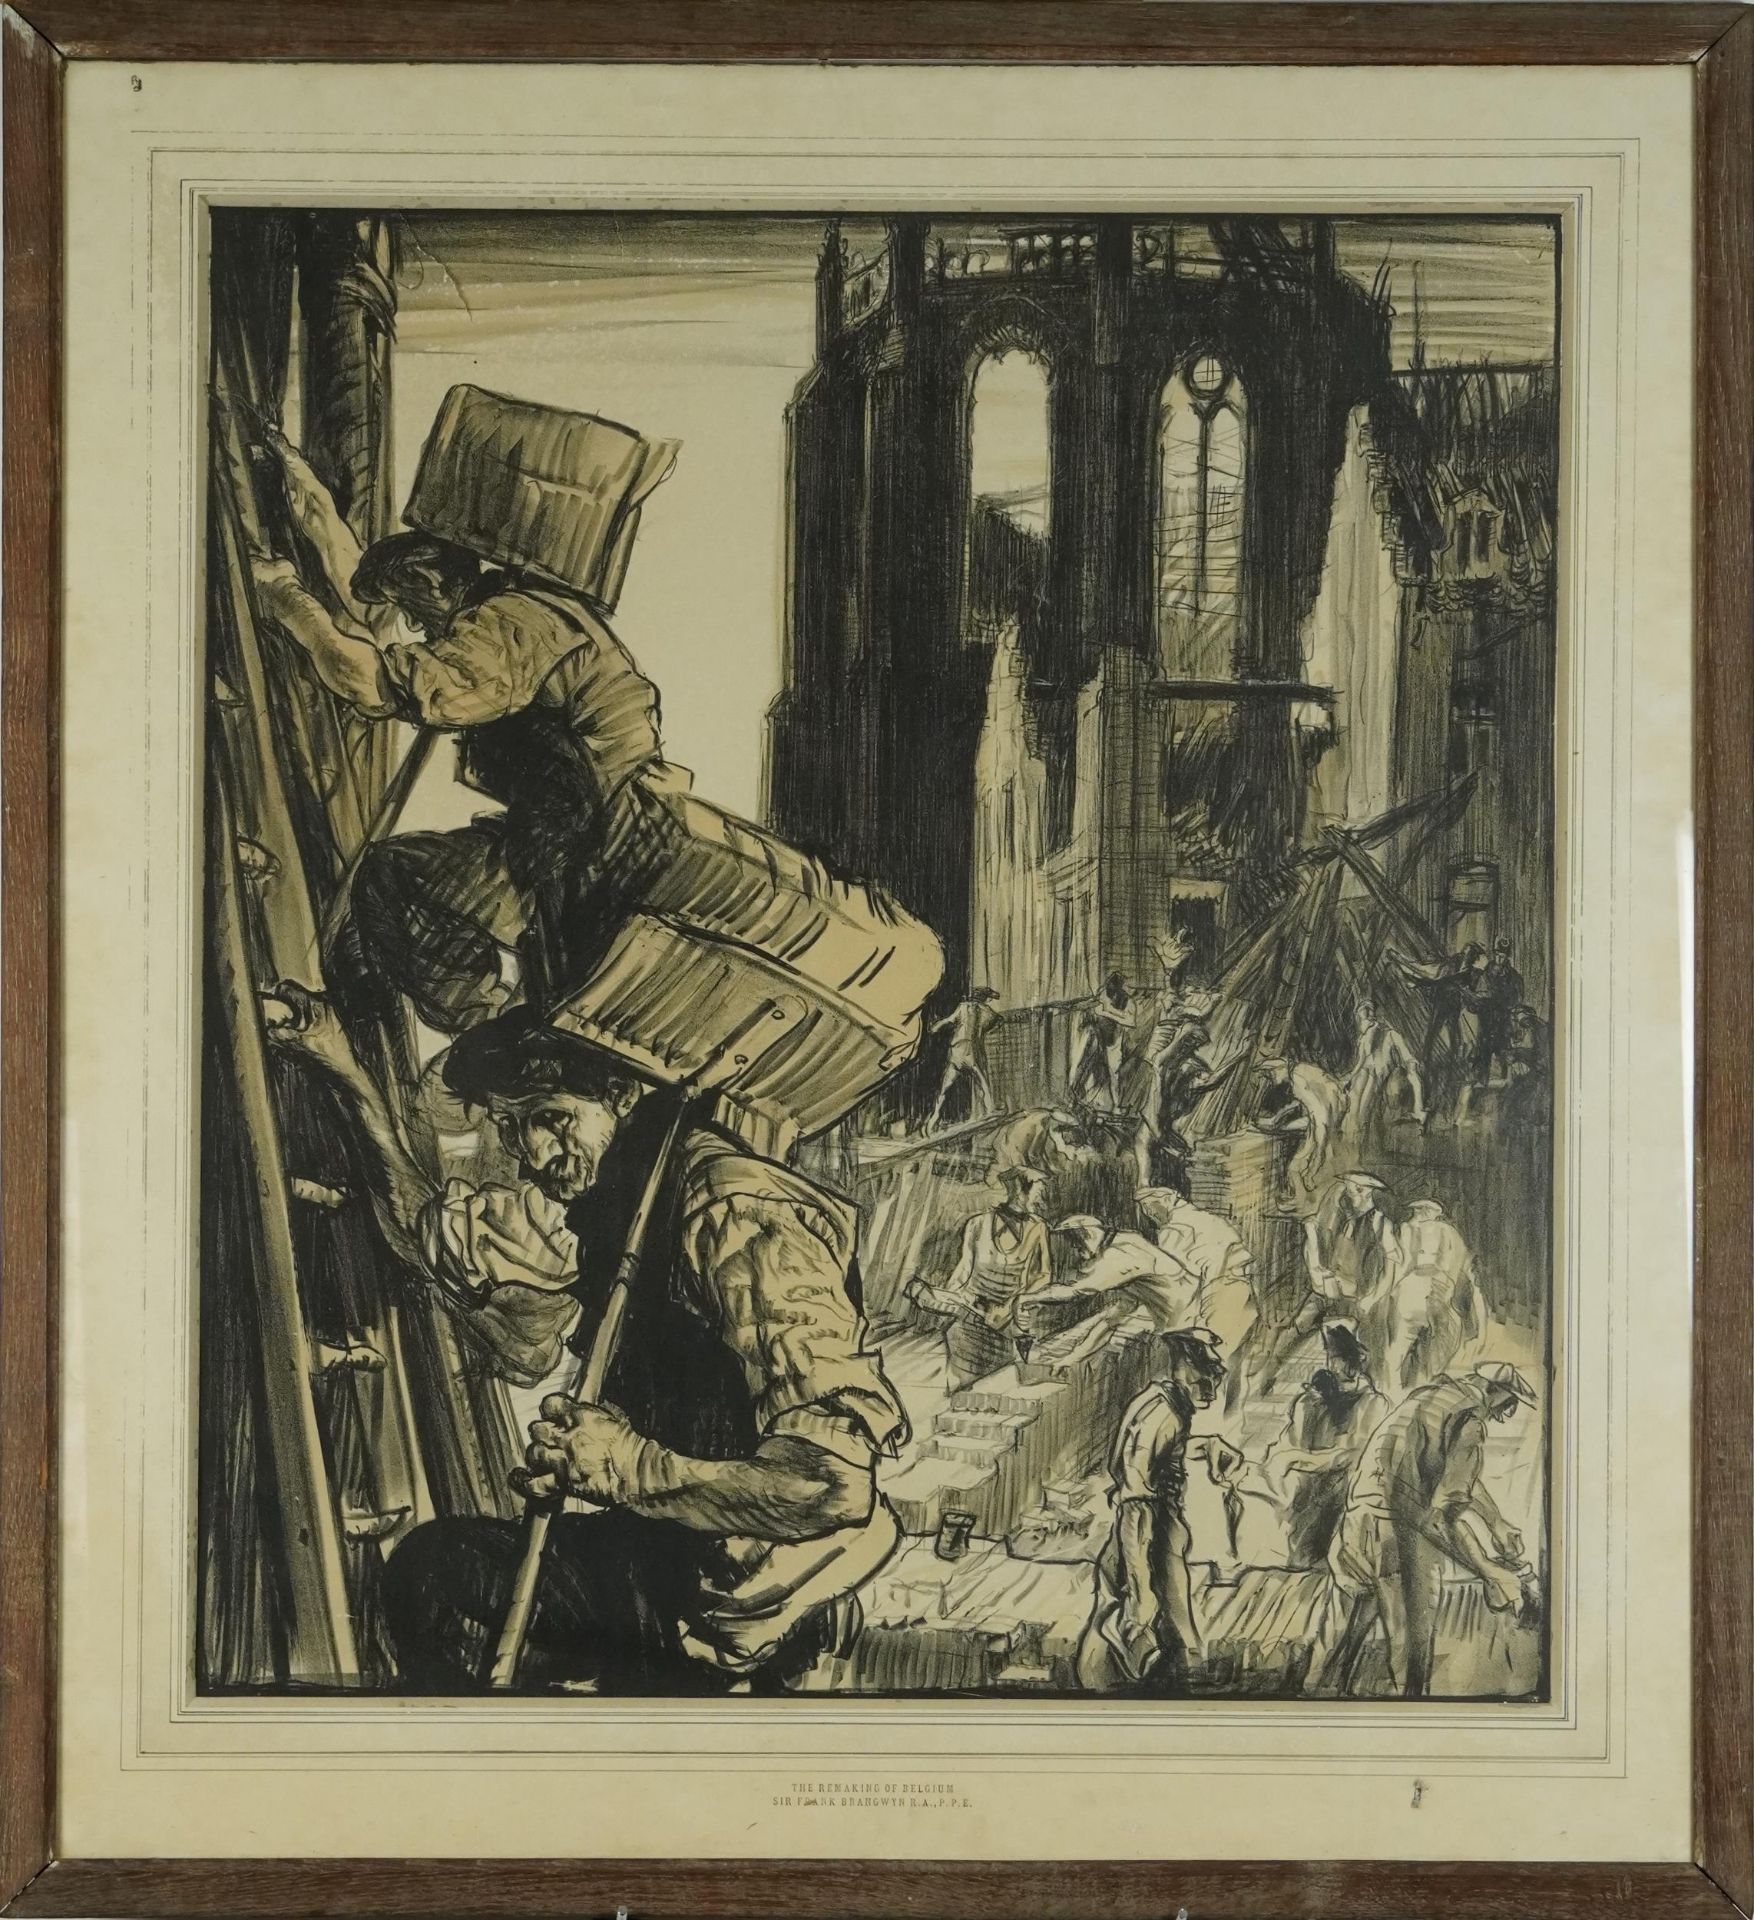 Sir Frank Brangwyn RA PPE - The Remaking of Belgium, charcoal on paper, Charles & Co London label - Image 2 of 4